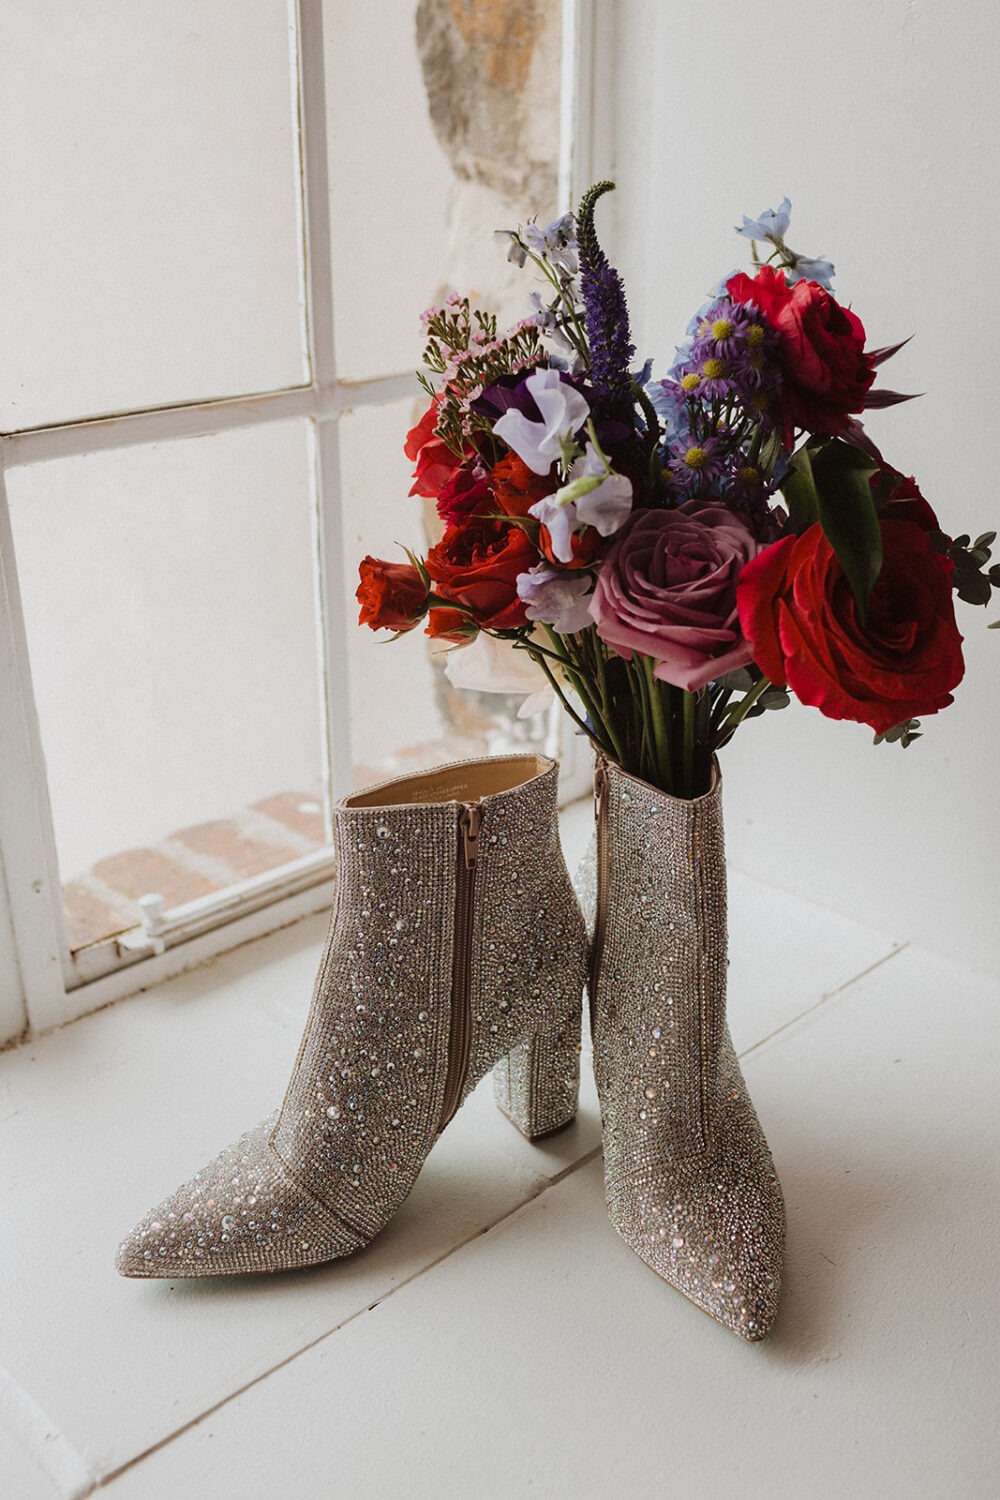 bride styles bedazzled shoes with bouquet using best wedding planning tips